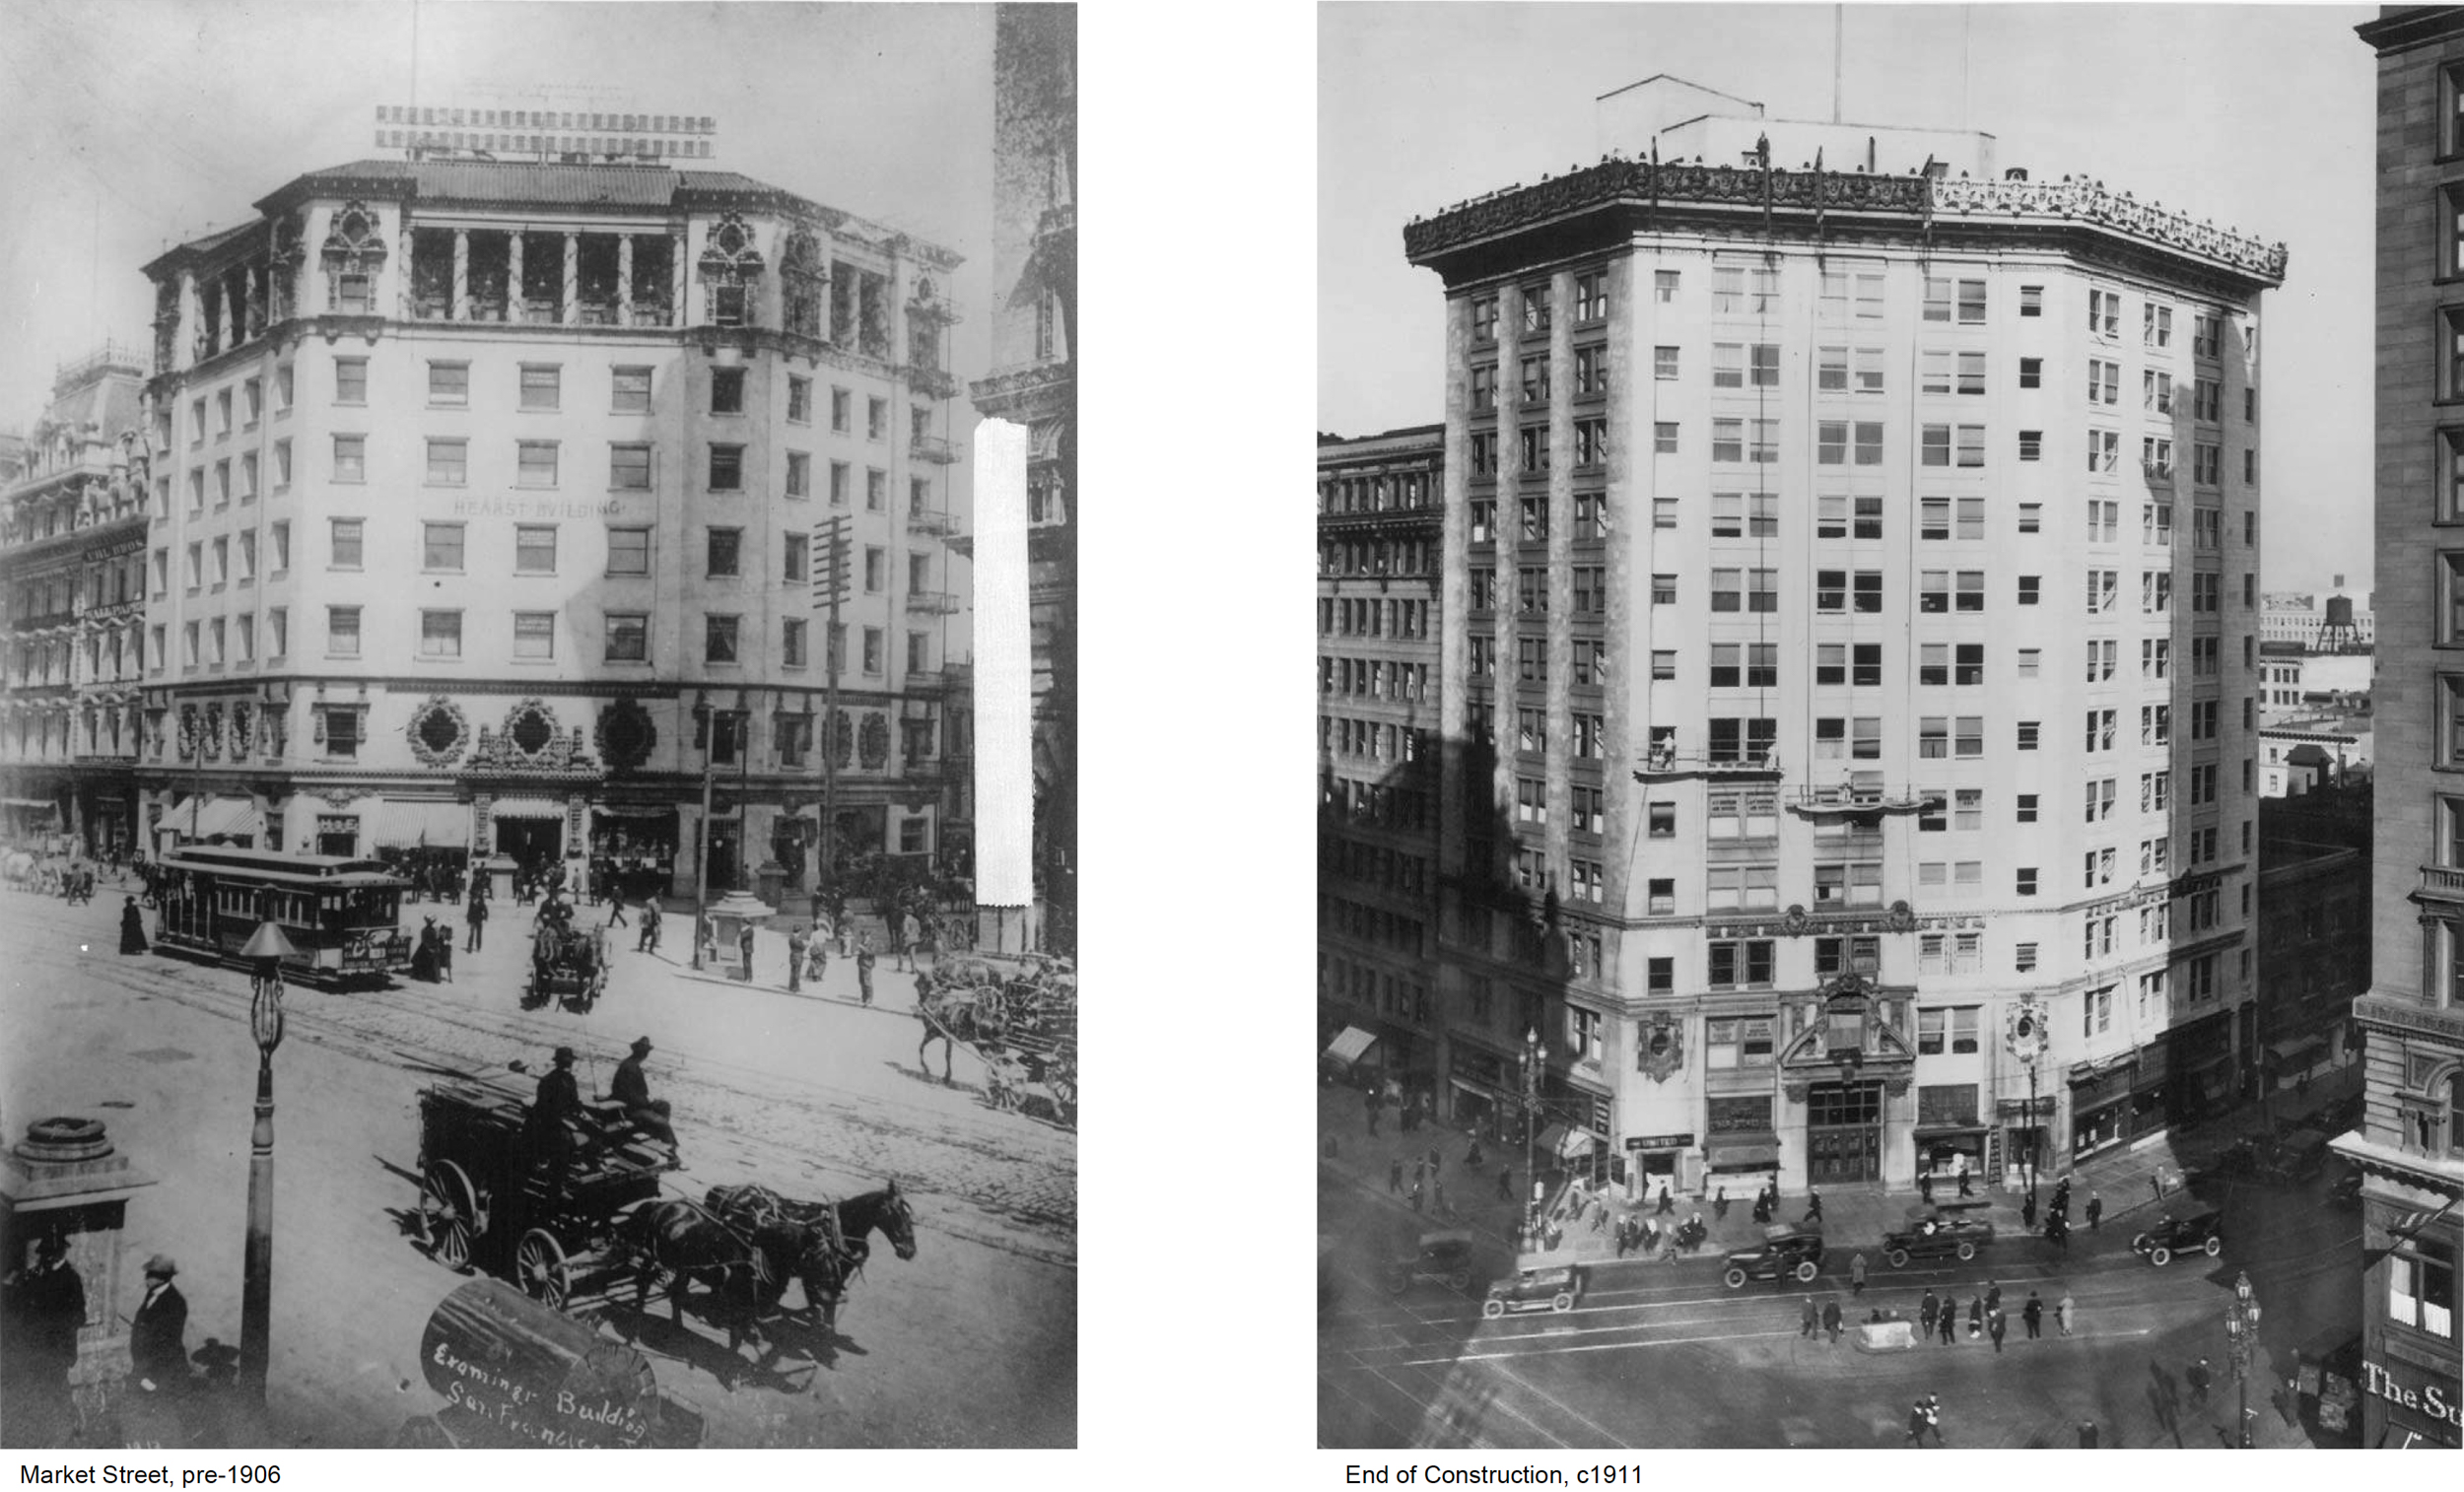 Hearst Building 1898 version and 1911 version, historic images via Knapp Architects